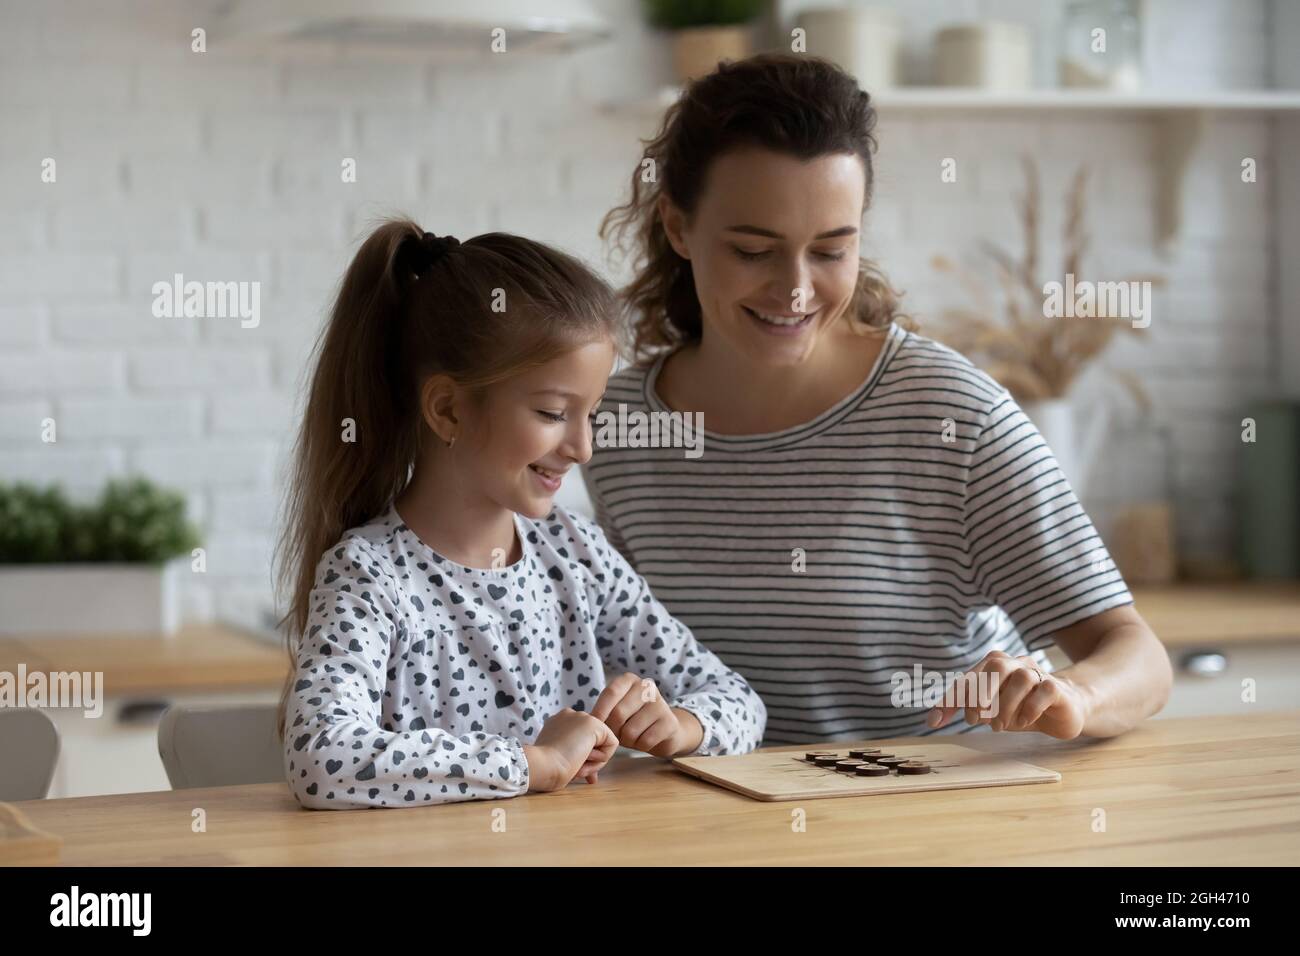 Happy engaged mom and daughter kid enjoying in board game Stock Photo